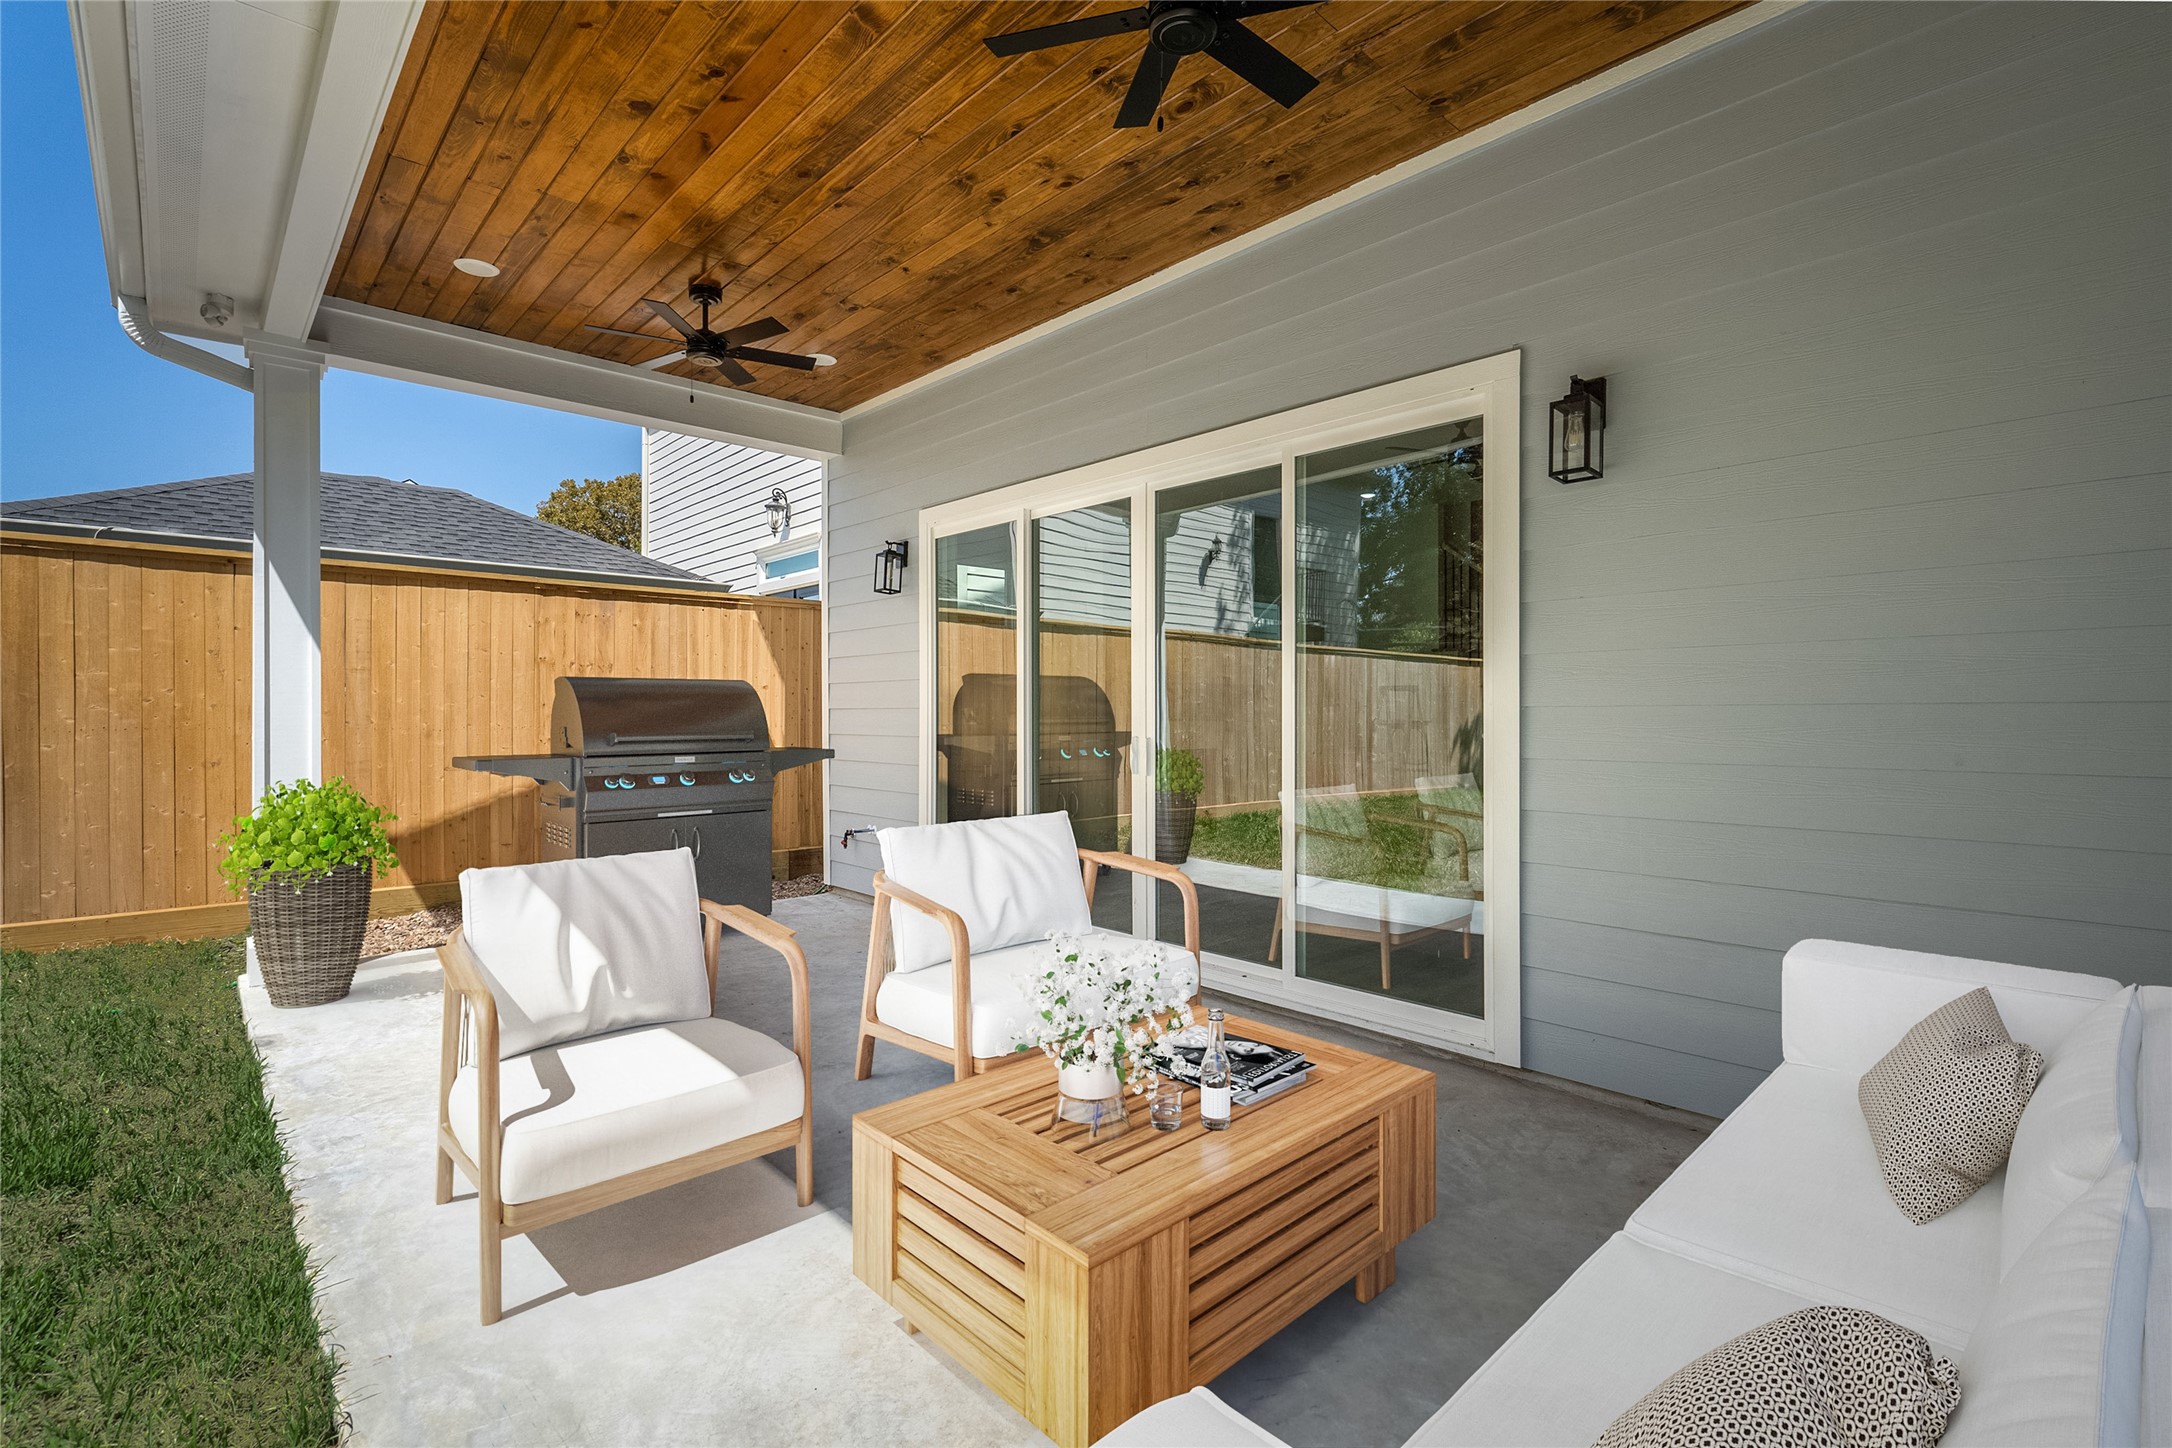 The covered patio sits beneath two ceiling fans and is perfect for relaxing on those cool fall evenings. The virtually staged grill sits where the water/gas lines are located. *Virtual staging has been added*